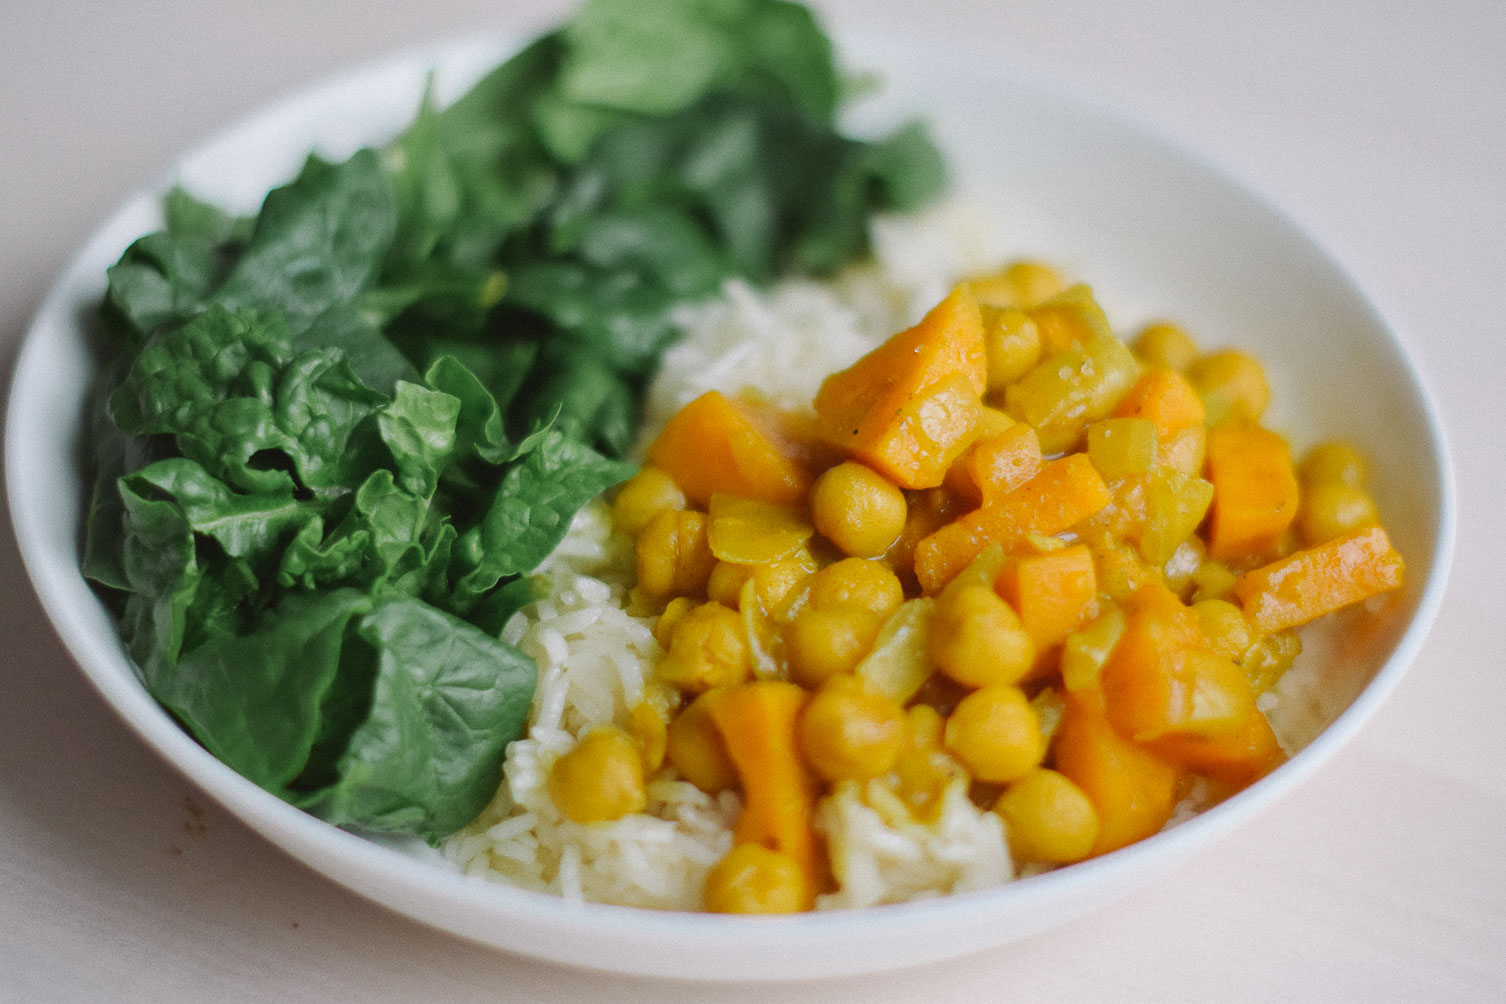 preparing an easy indian-inspired dinner recipe for sweet potato chickpea curry stew